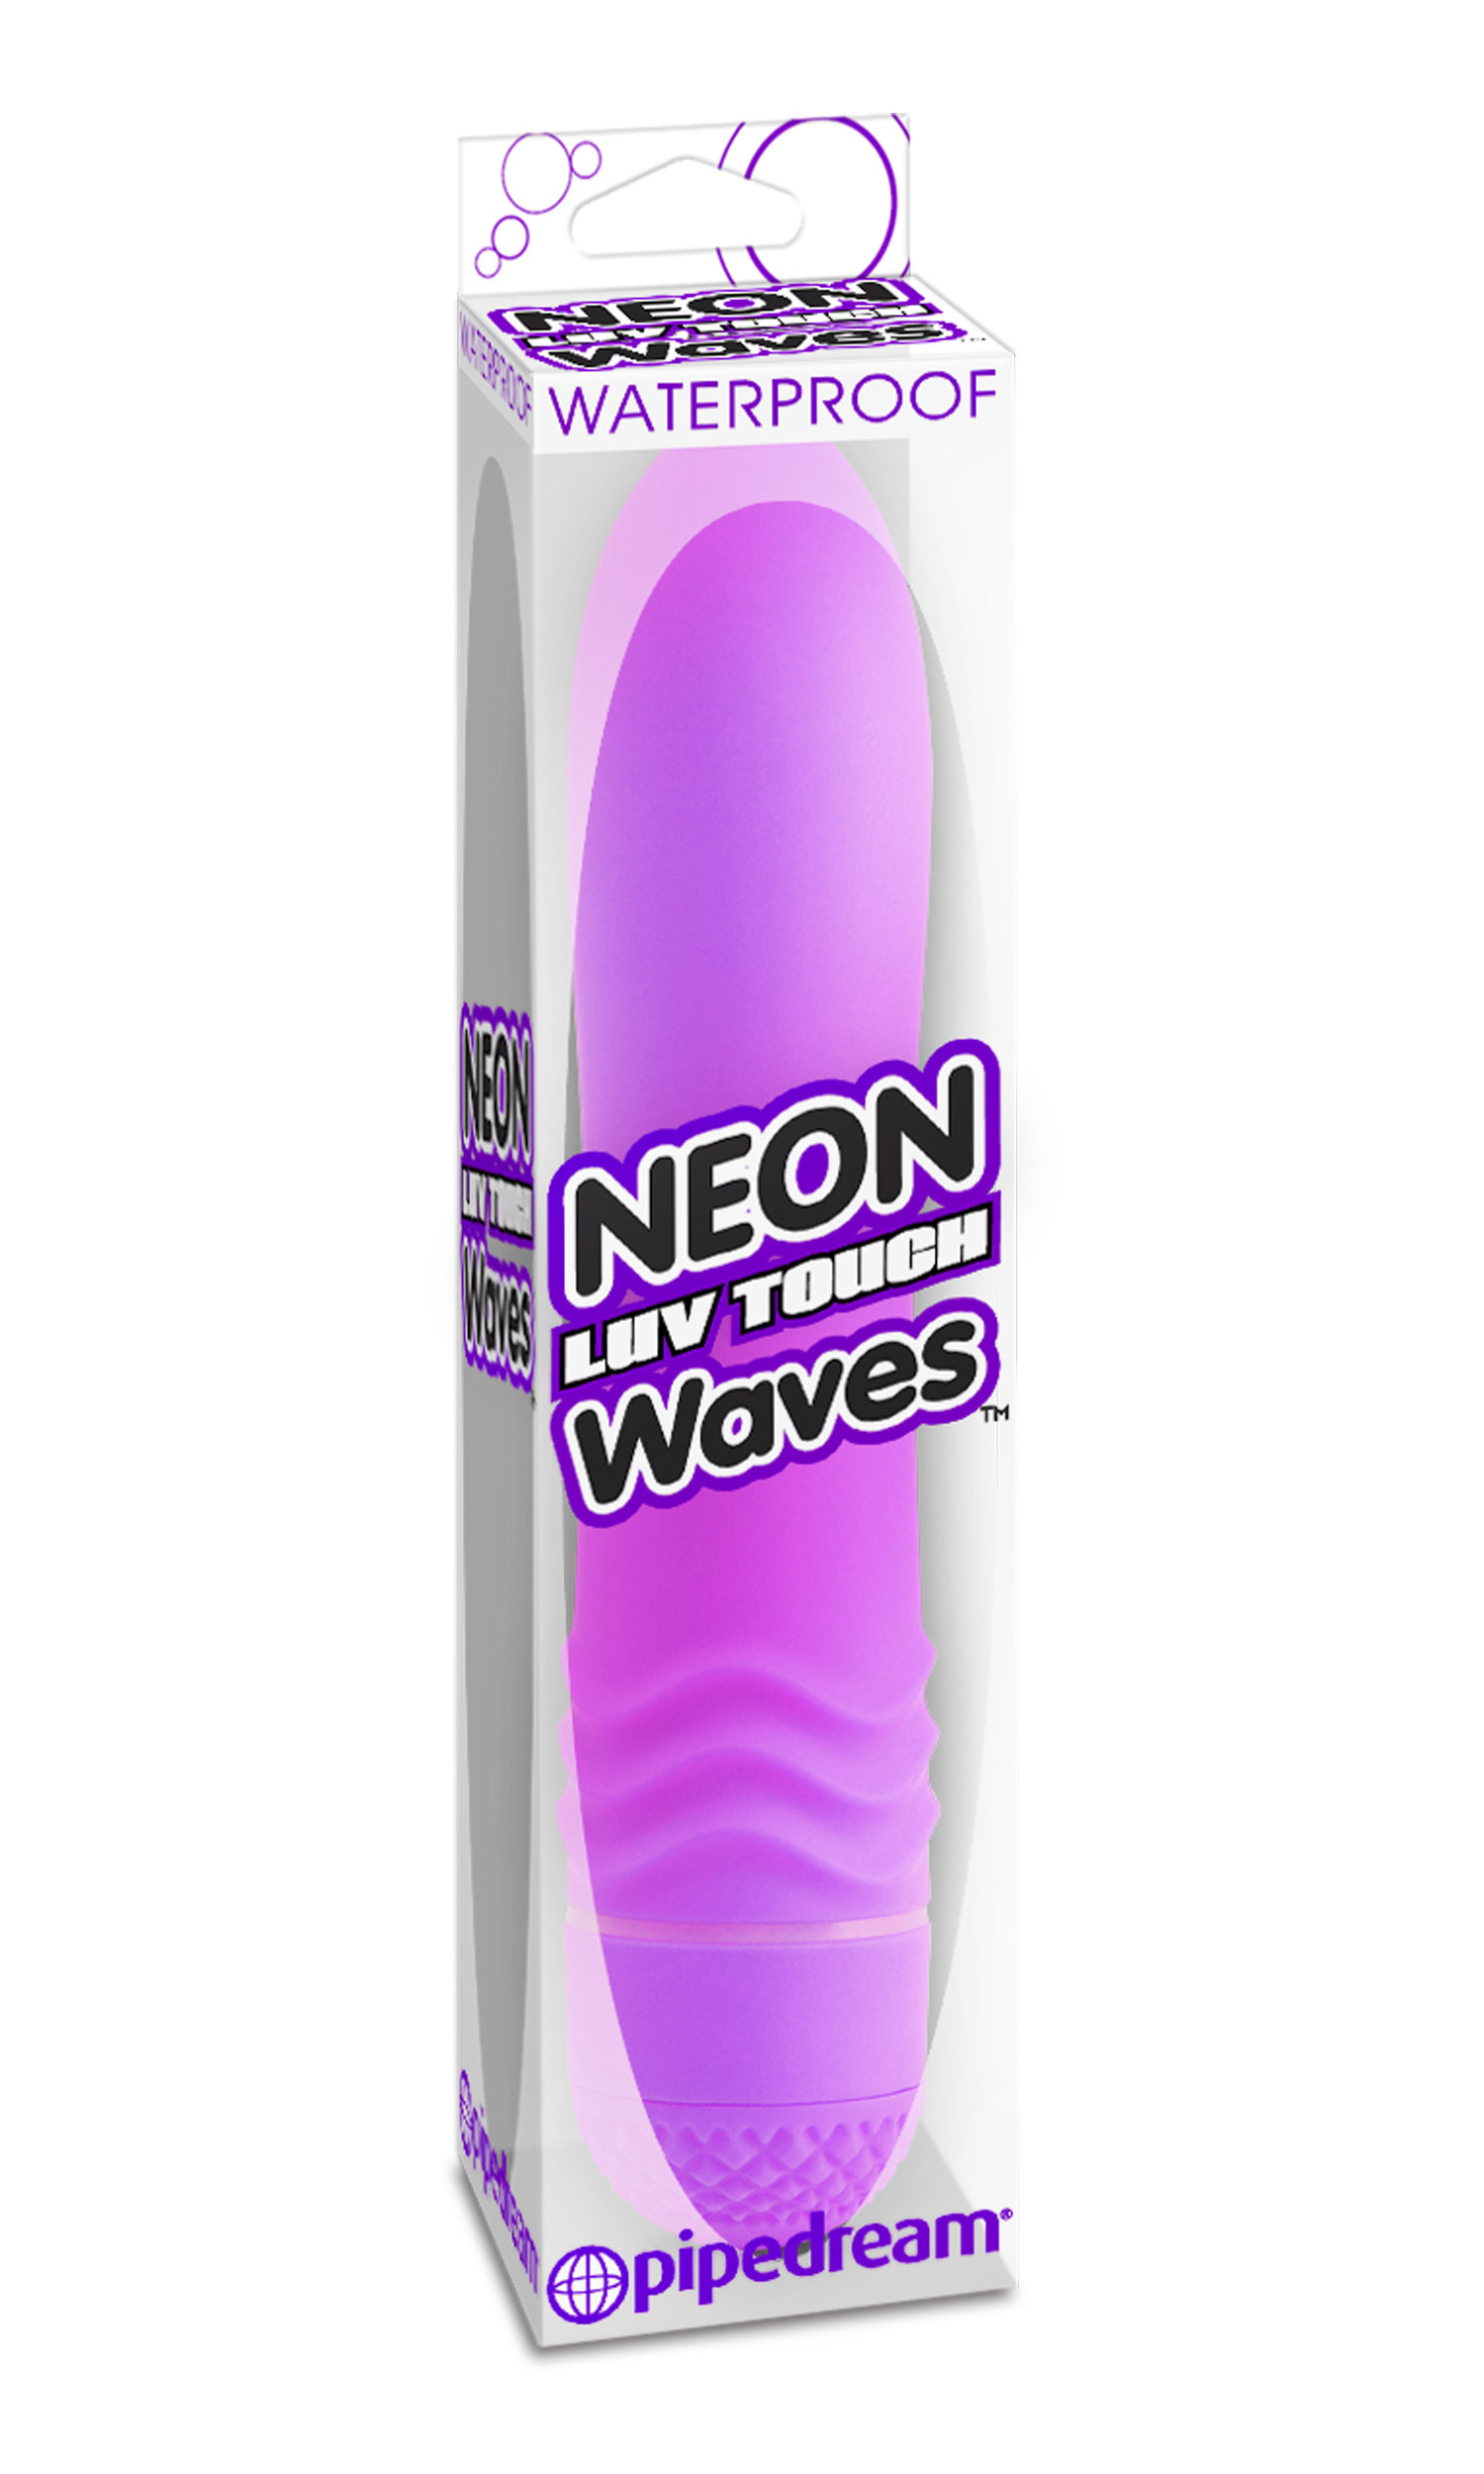 NEON LUV TOUCH WAVE PURPLE - PD140912